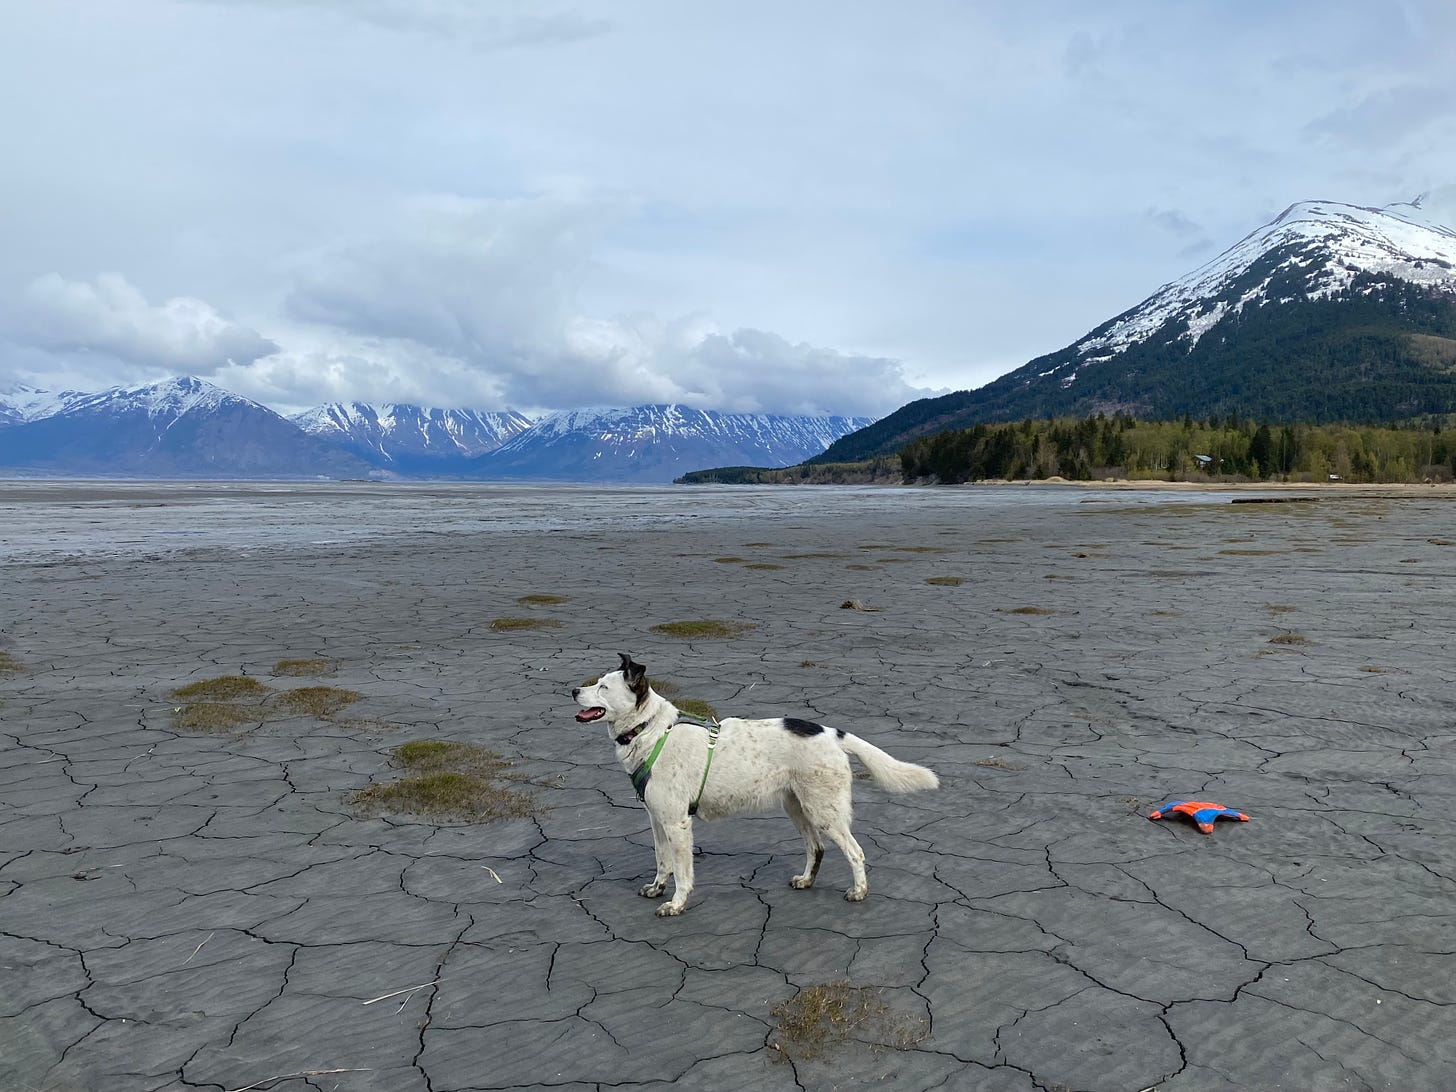 A happy dog standing on mud flats in front of mountains